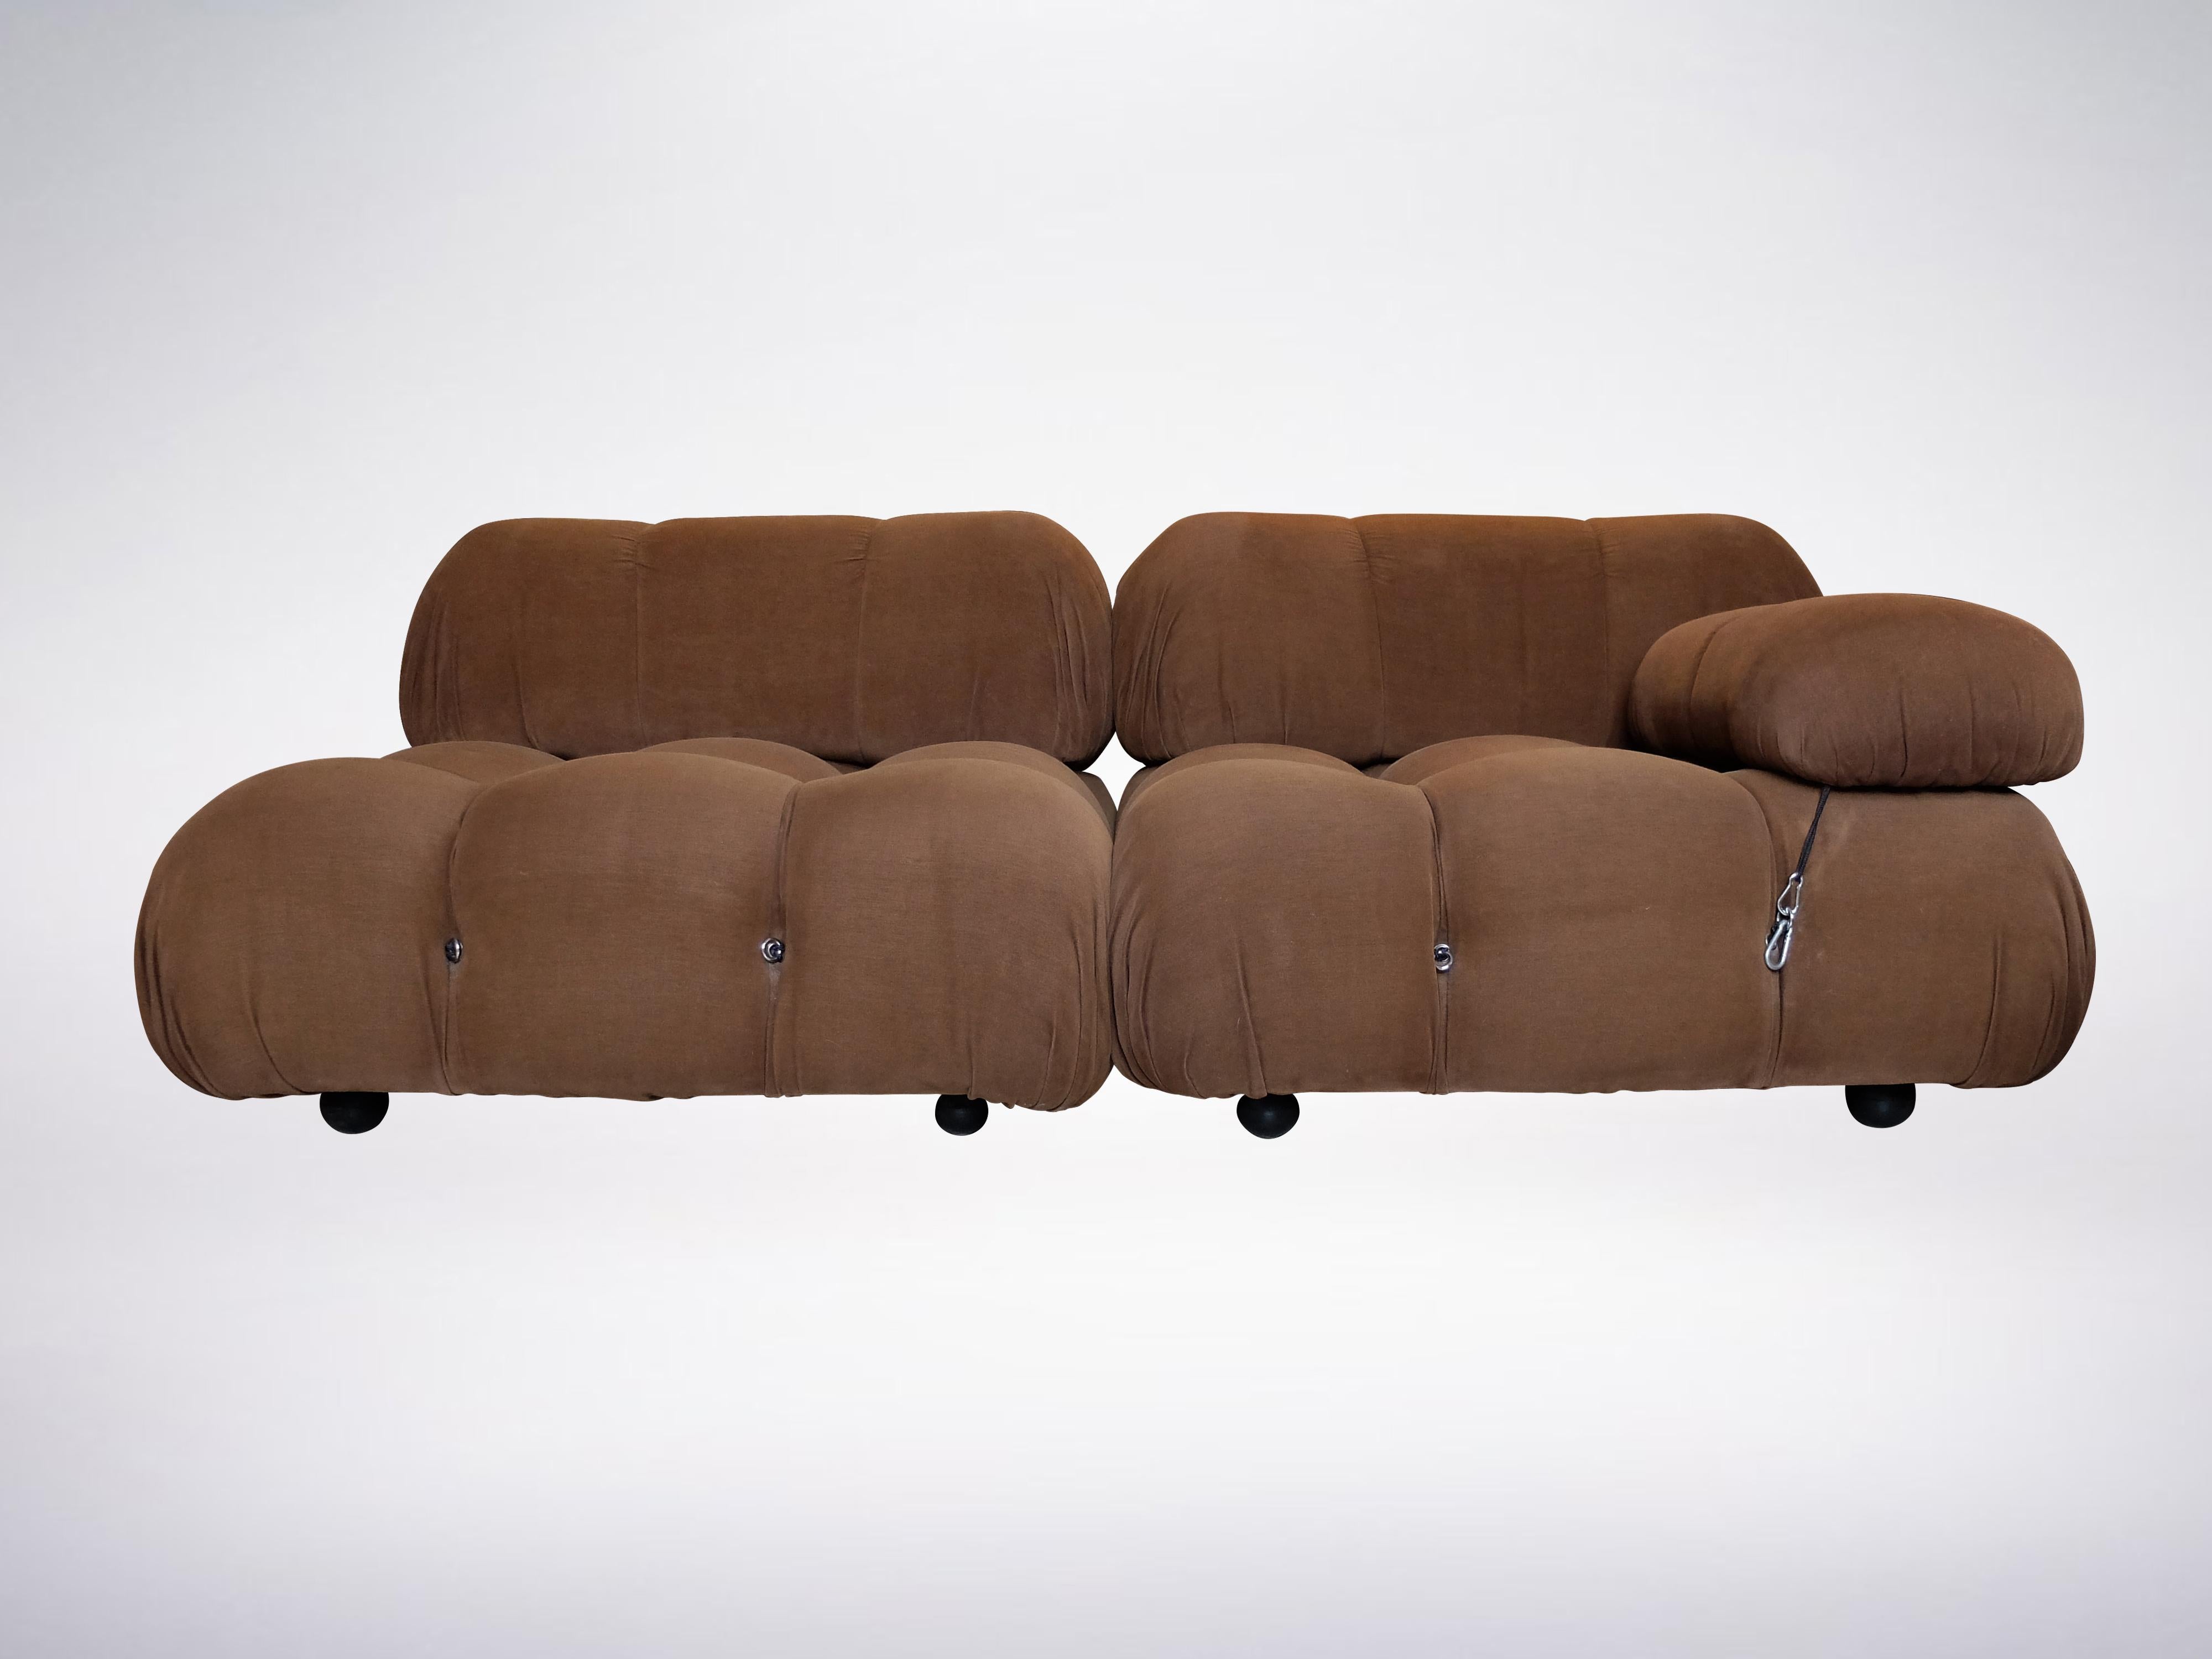 Mario Bellini Camaleonda sofa set of 2 elements in brown original upholstery, made for B&B Italia in 1970.
Original company logo markings below.
The seats are currently clad in their original upholstery.
On request we also provide complete